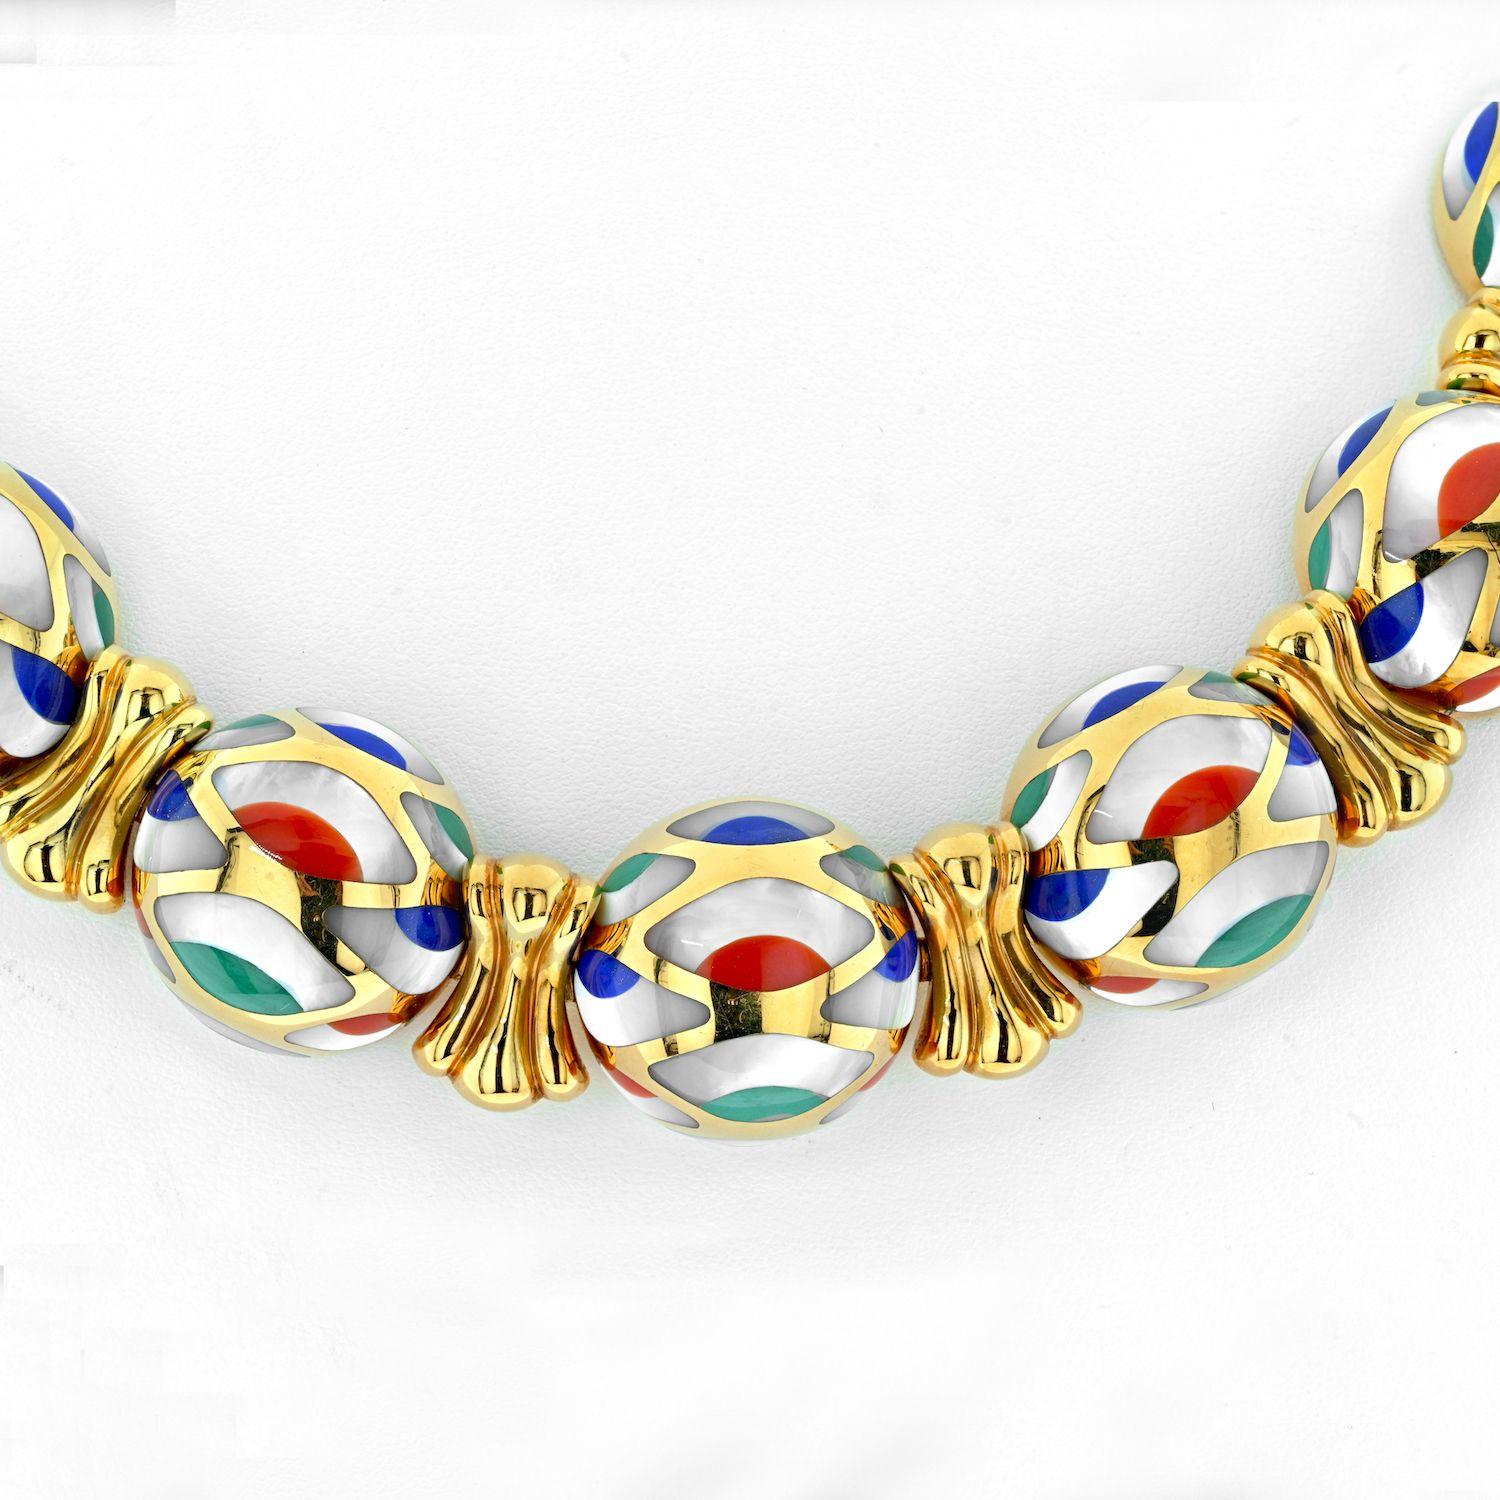 Asch Grossbardt 18K Yellow Gold Mother Of Pearl Multi-Color Enamel Necklace.
Mother-of-pearl, coral, lapis lazuli, and malachite plaques, 18k yellow gold, signed Asch Grossbardt.
Measurements of the necklace 49.2 cm (193/8 in). 
Each piece of Asch